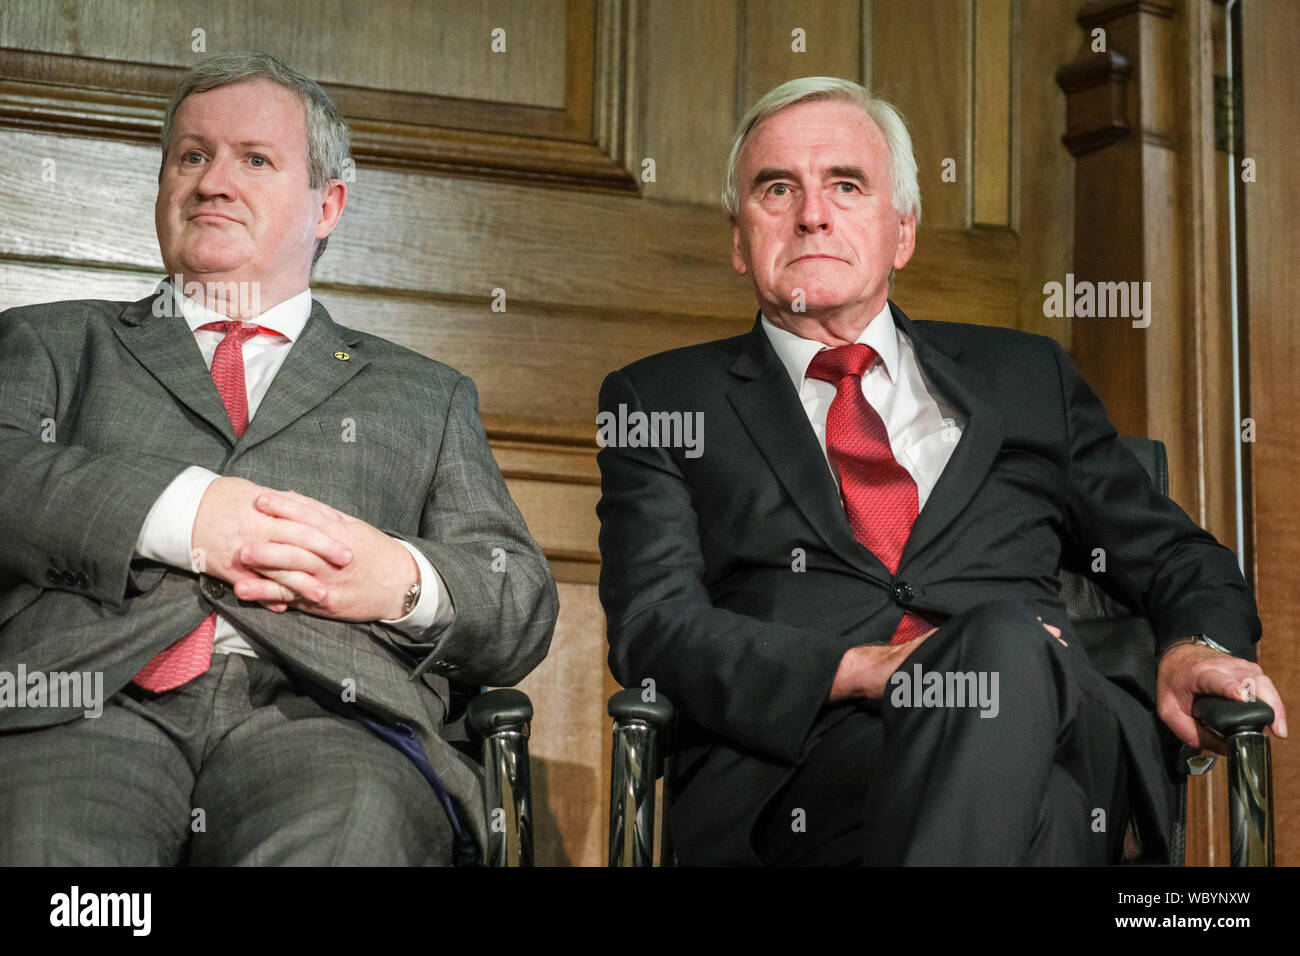 London, UK. 27th Aug, 2019. Ian Blackford, SNP, and John McDonnell, Labour.  Cross-party MPs and opposition party leaders assemble in the historic  location of Church House in London to sign their 'Church